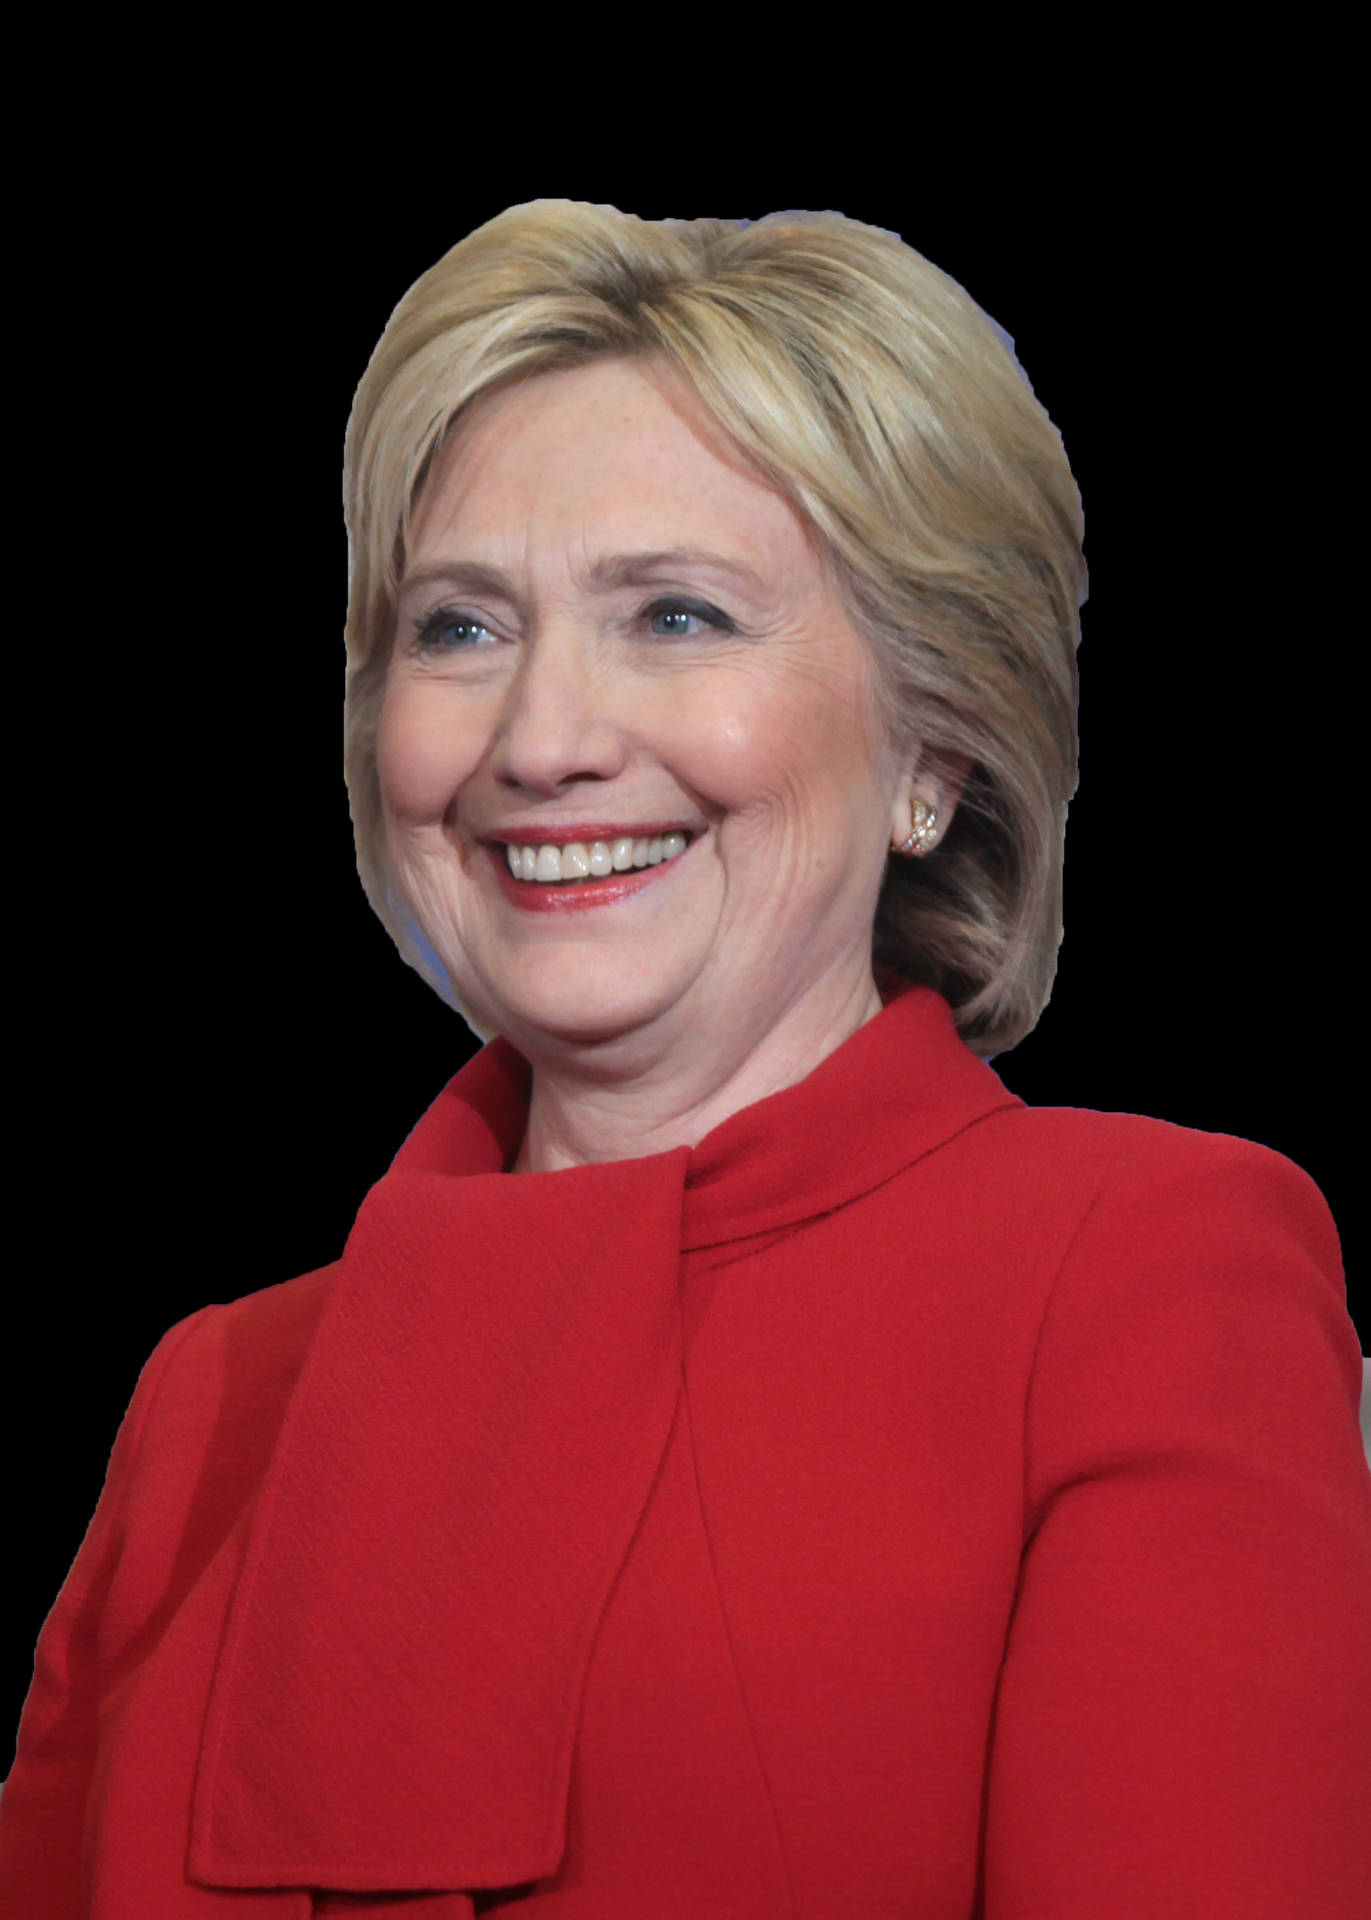 Hillary Clinton In Red Suit Wallpaper